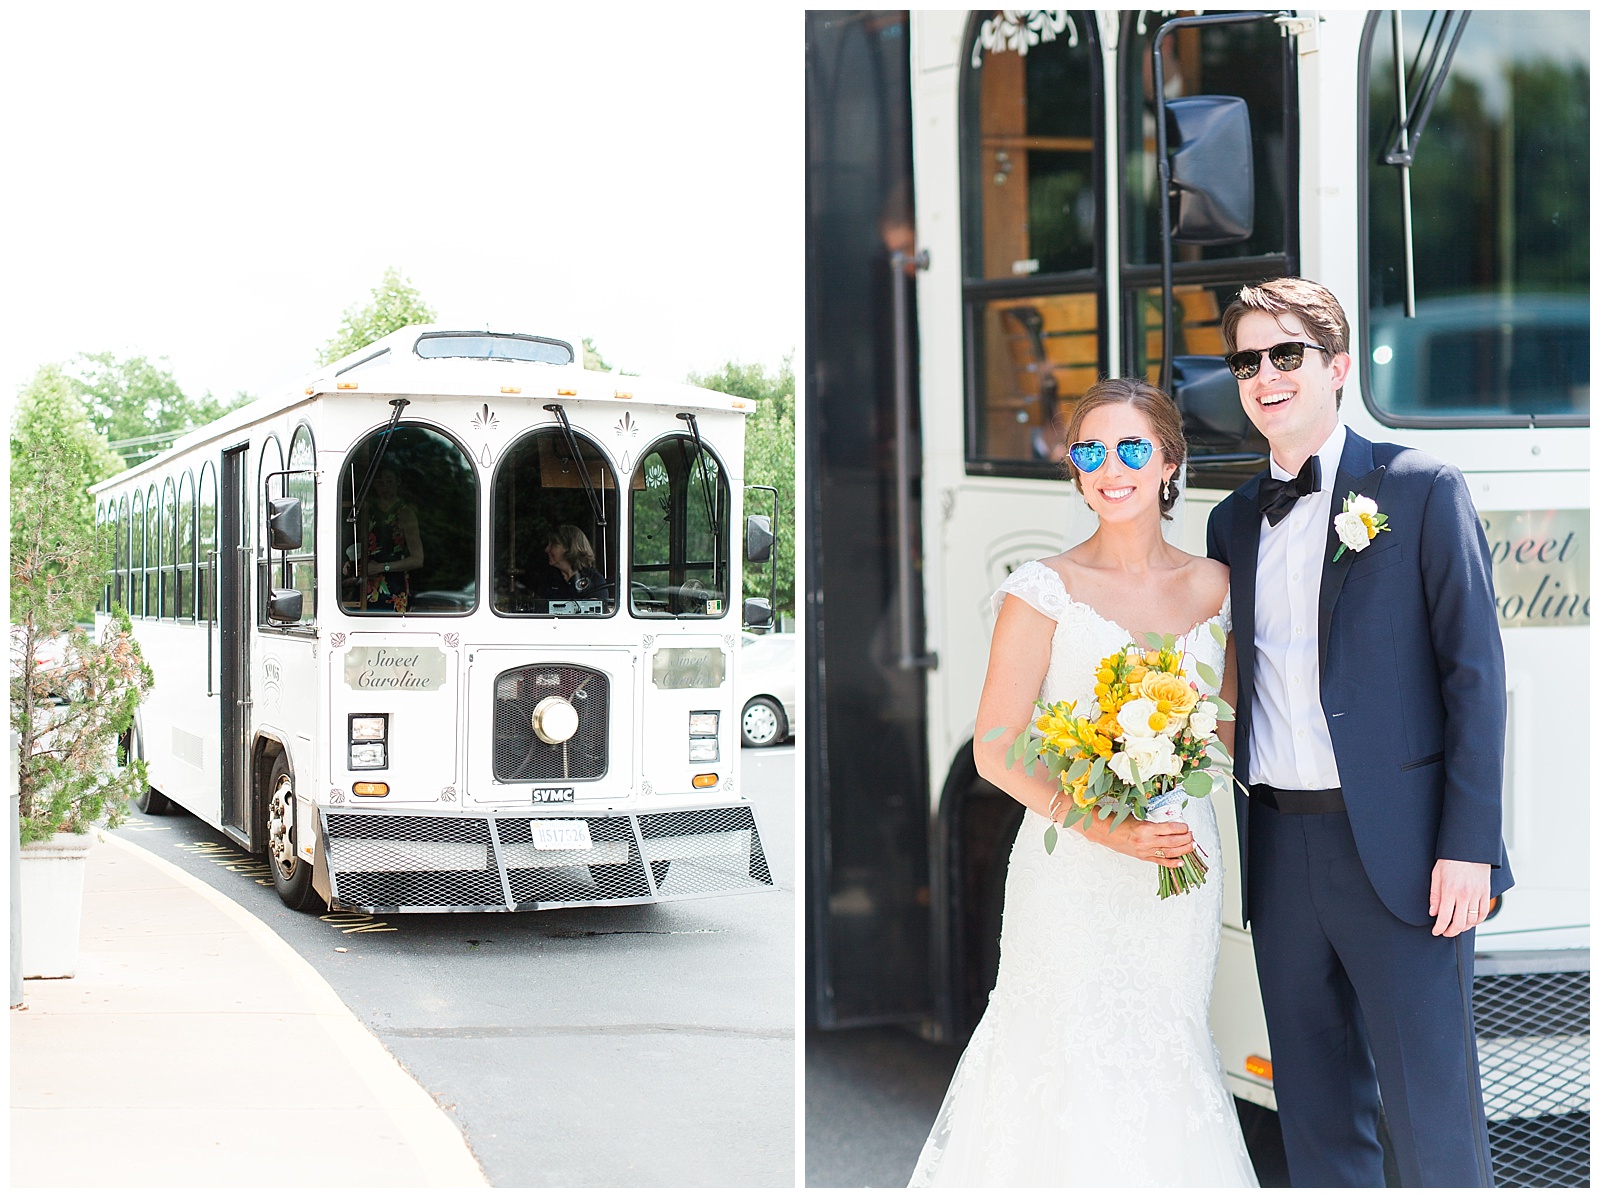 Bride and Groom with the Trolley in sunglasses